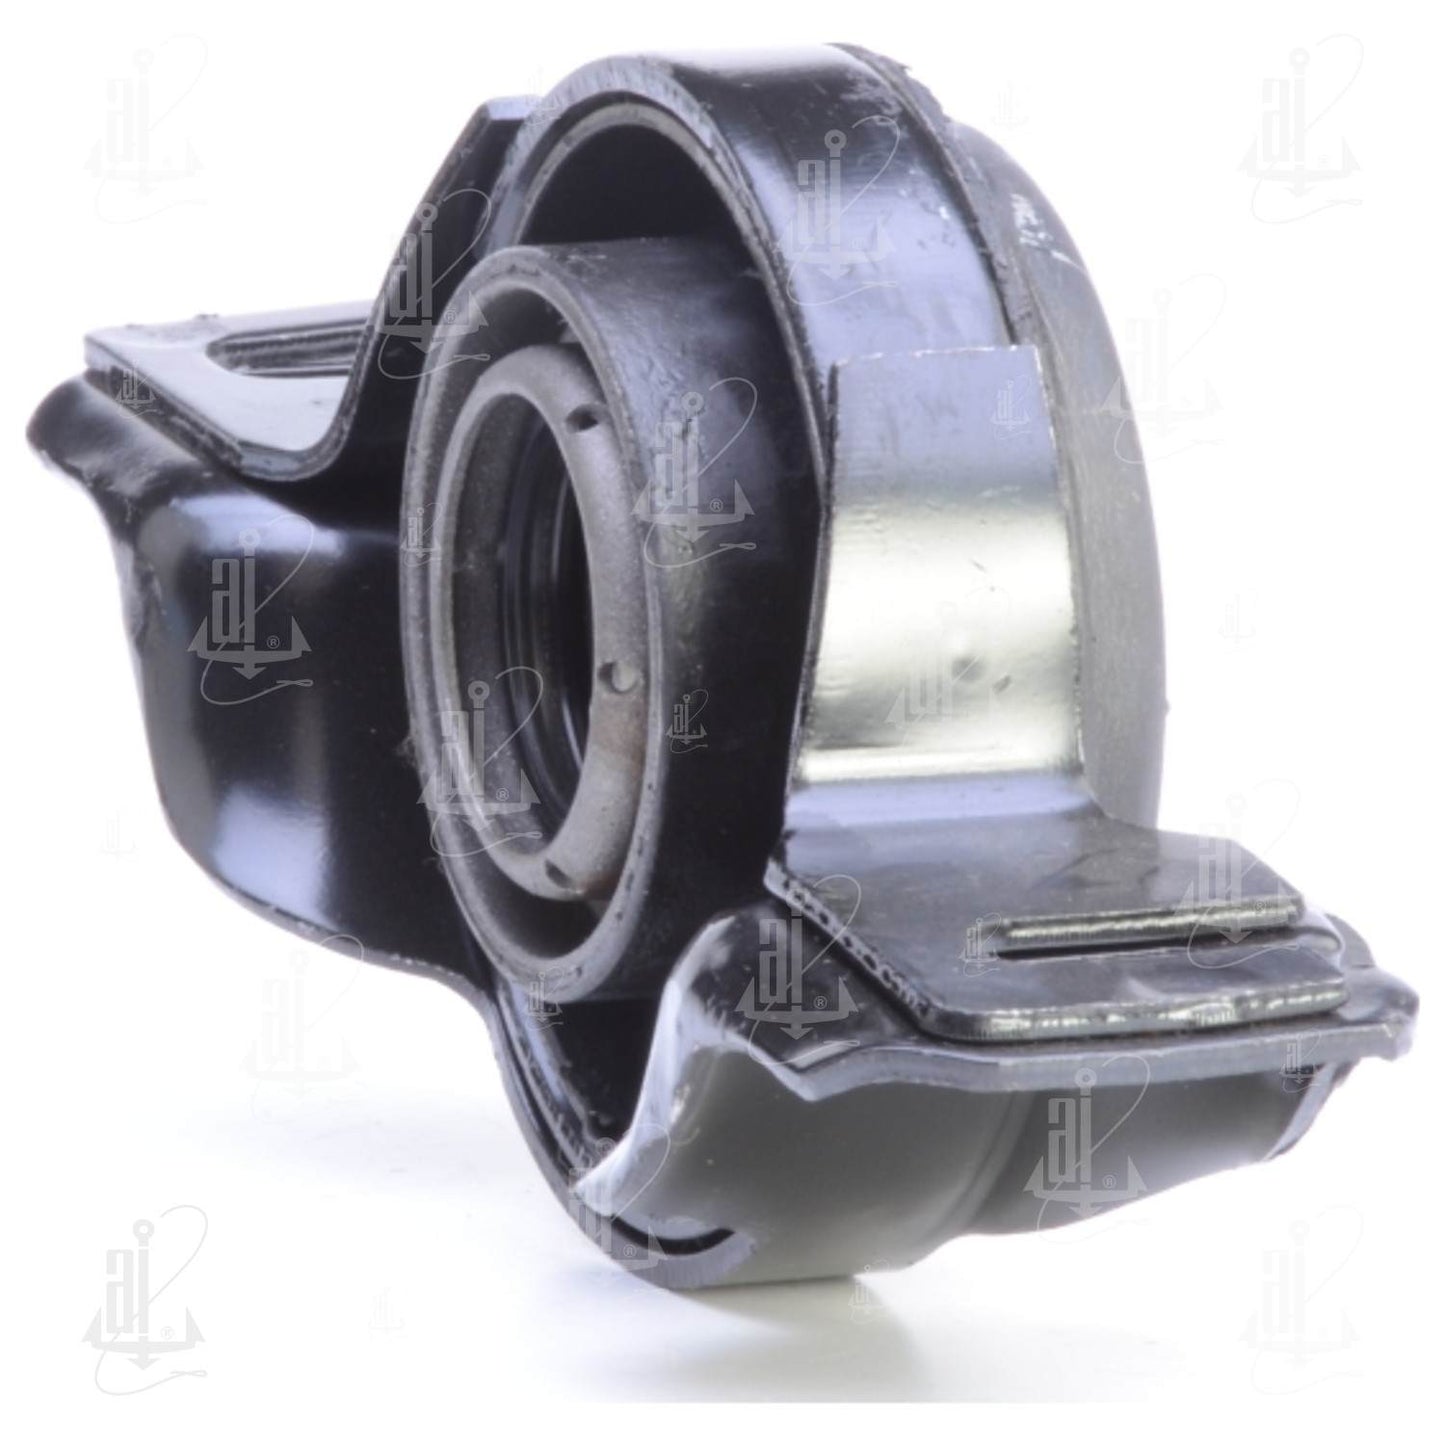 Right View of Center Drive Shaft Center Support Bearing ANCHOR 6082